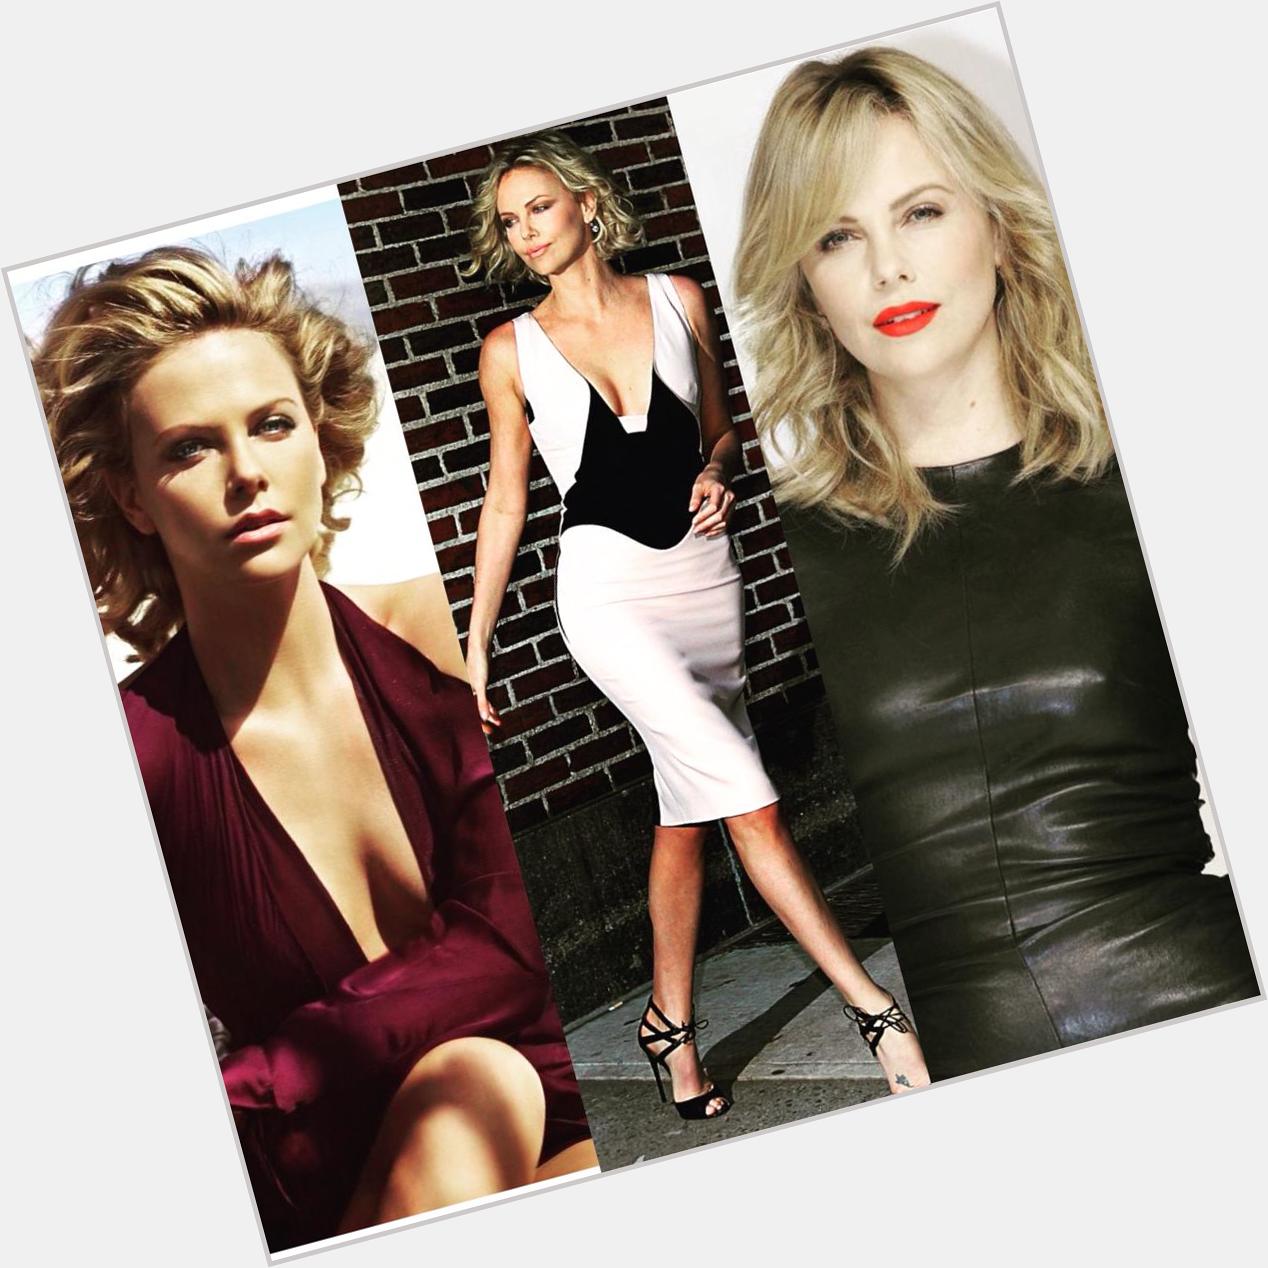 Happy bday Charlize Theron-1975 clearly a vintage year for fabulous women officially a big fan of this woman  